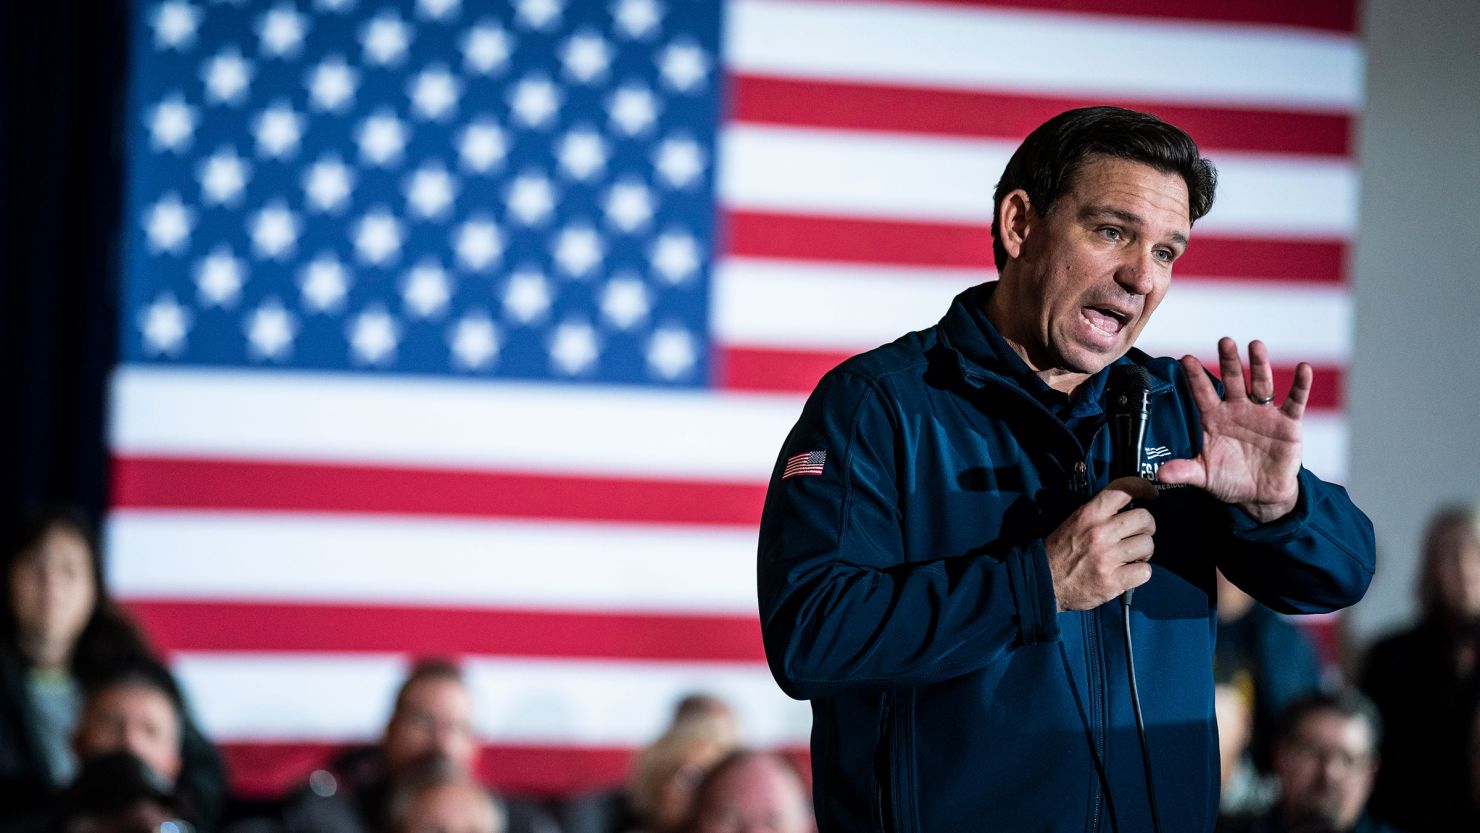 Florida Gov. Ron DeSantis speaks at a rally celebrating his 99th Iowa County held at the Thunderdome on Saturday, December 2, in Newton, Iowa.